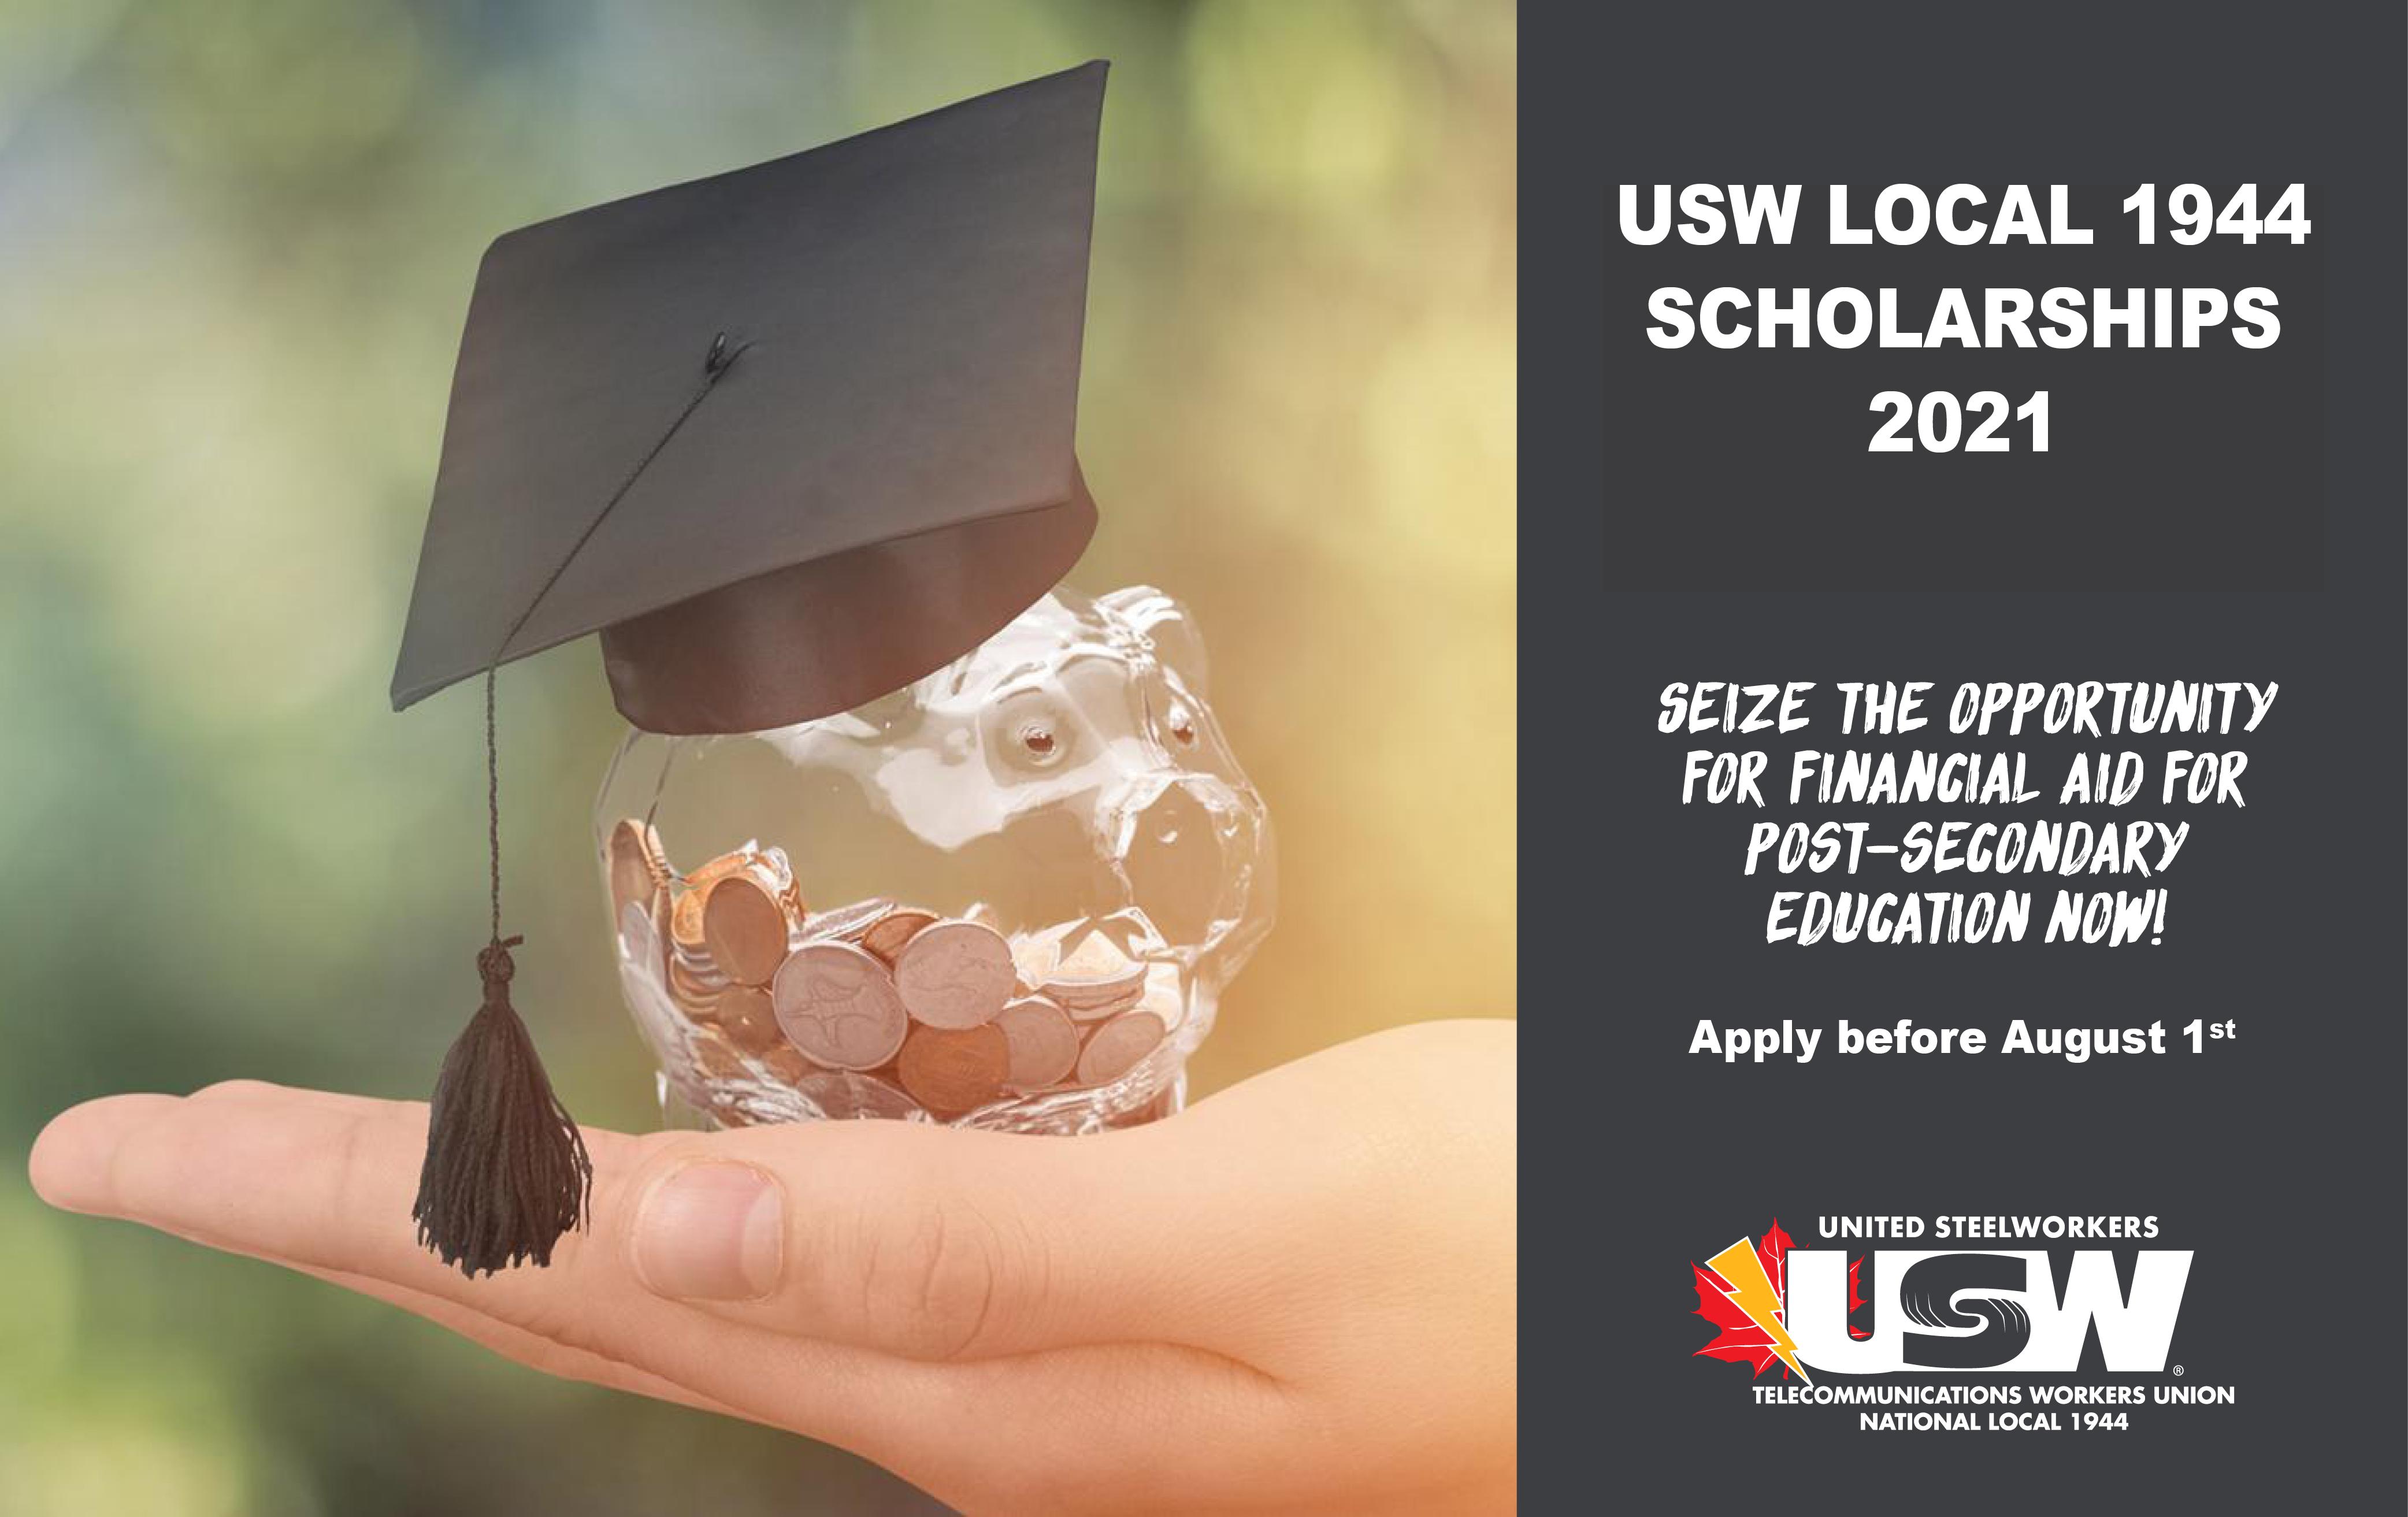 Has your child applied yet for USW Local 1944’s 2021 Scholarships